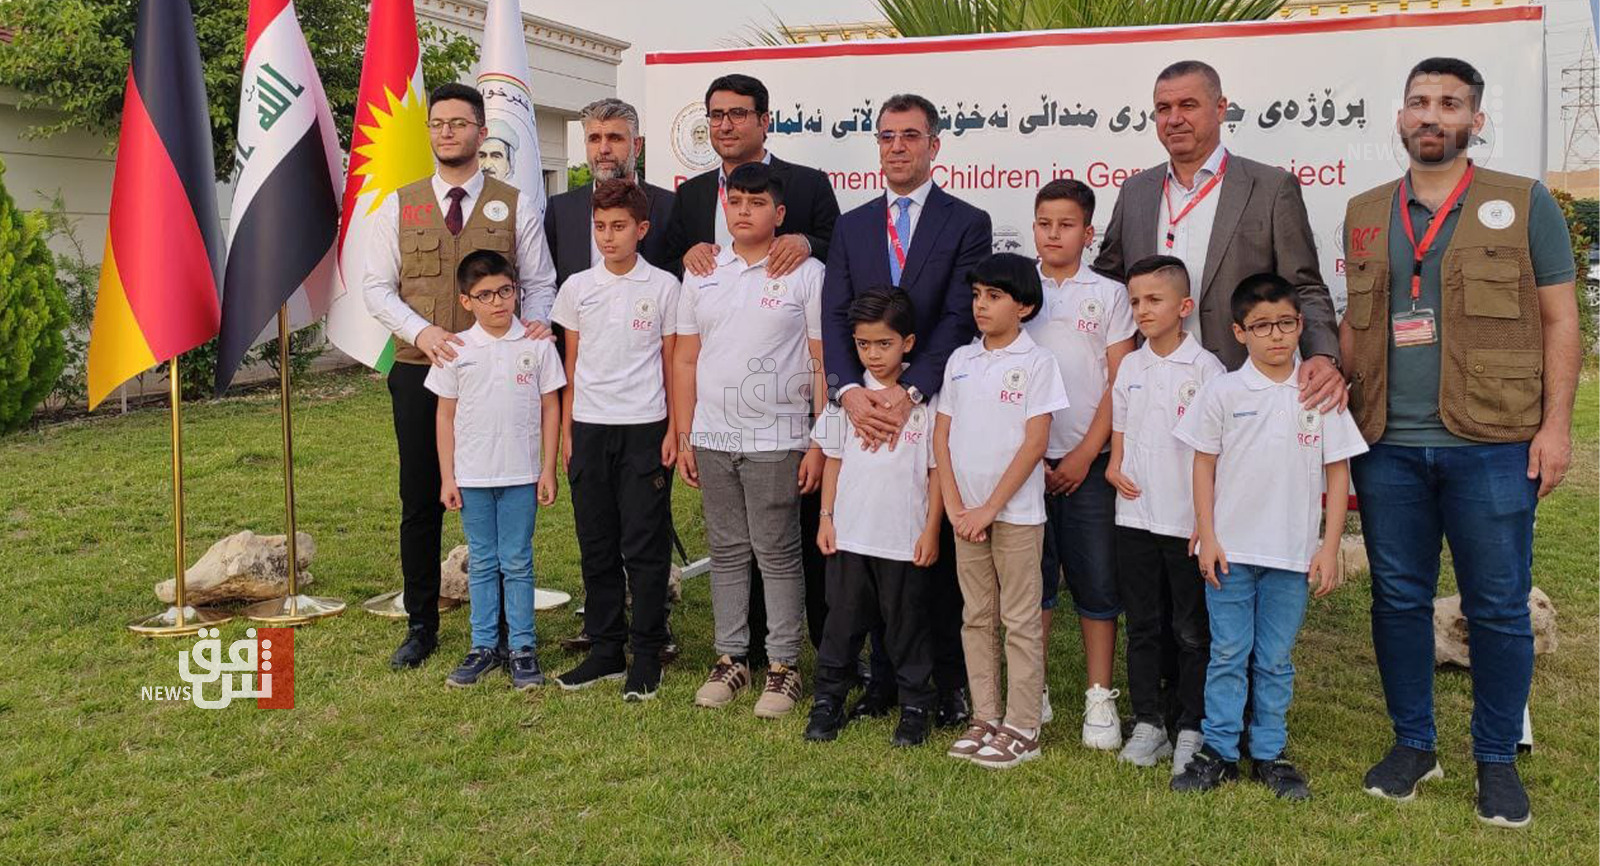 Barzani Foundation sends 30 children to Germany for medical treatment